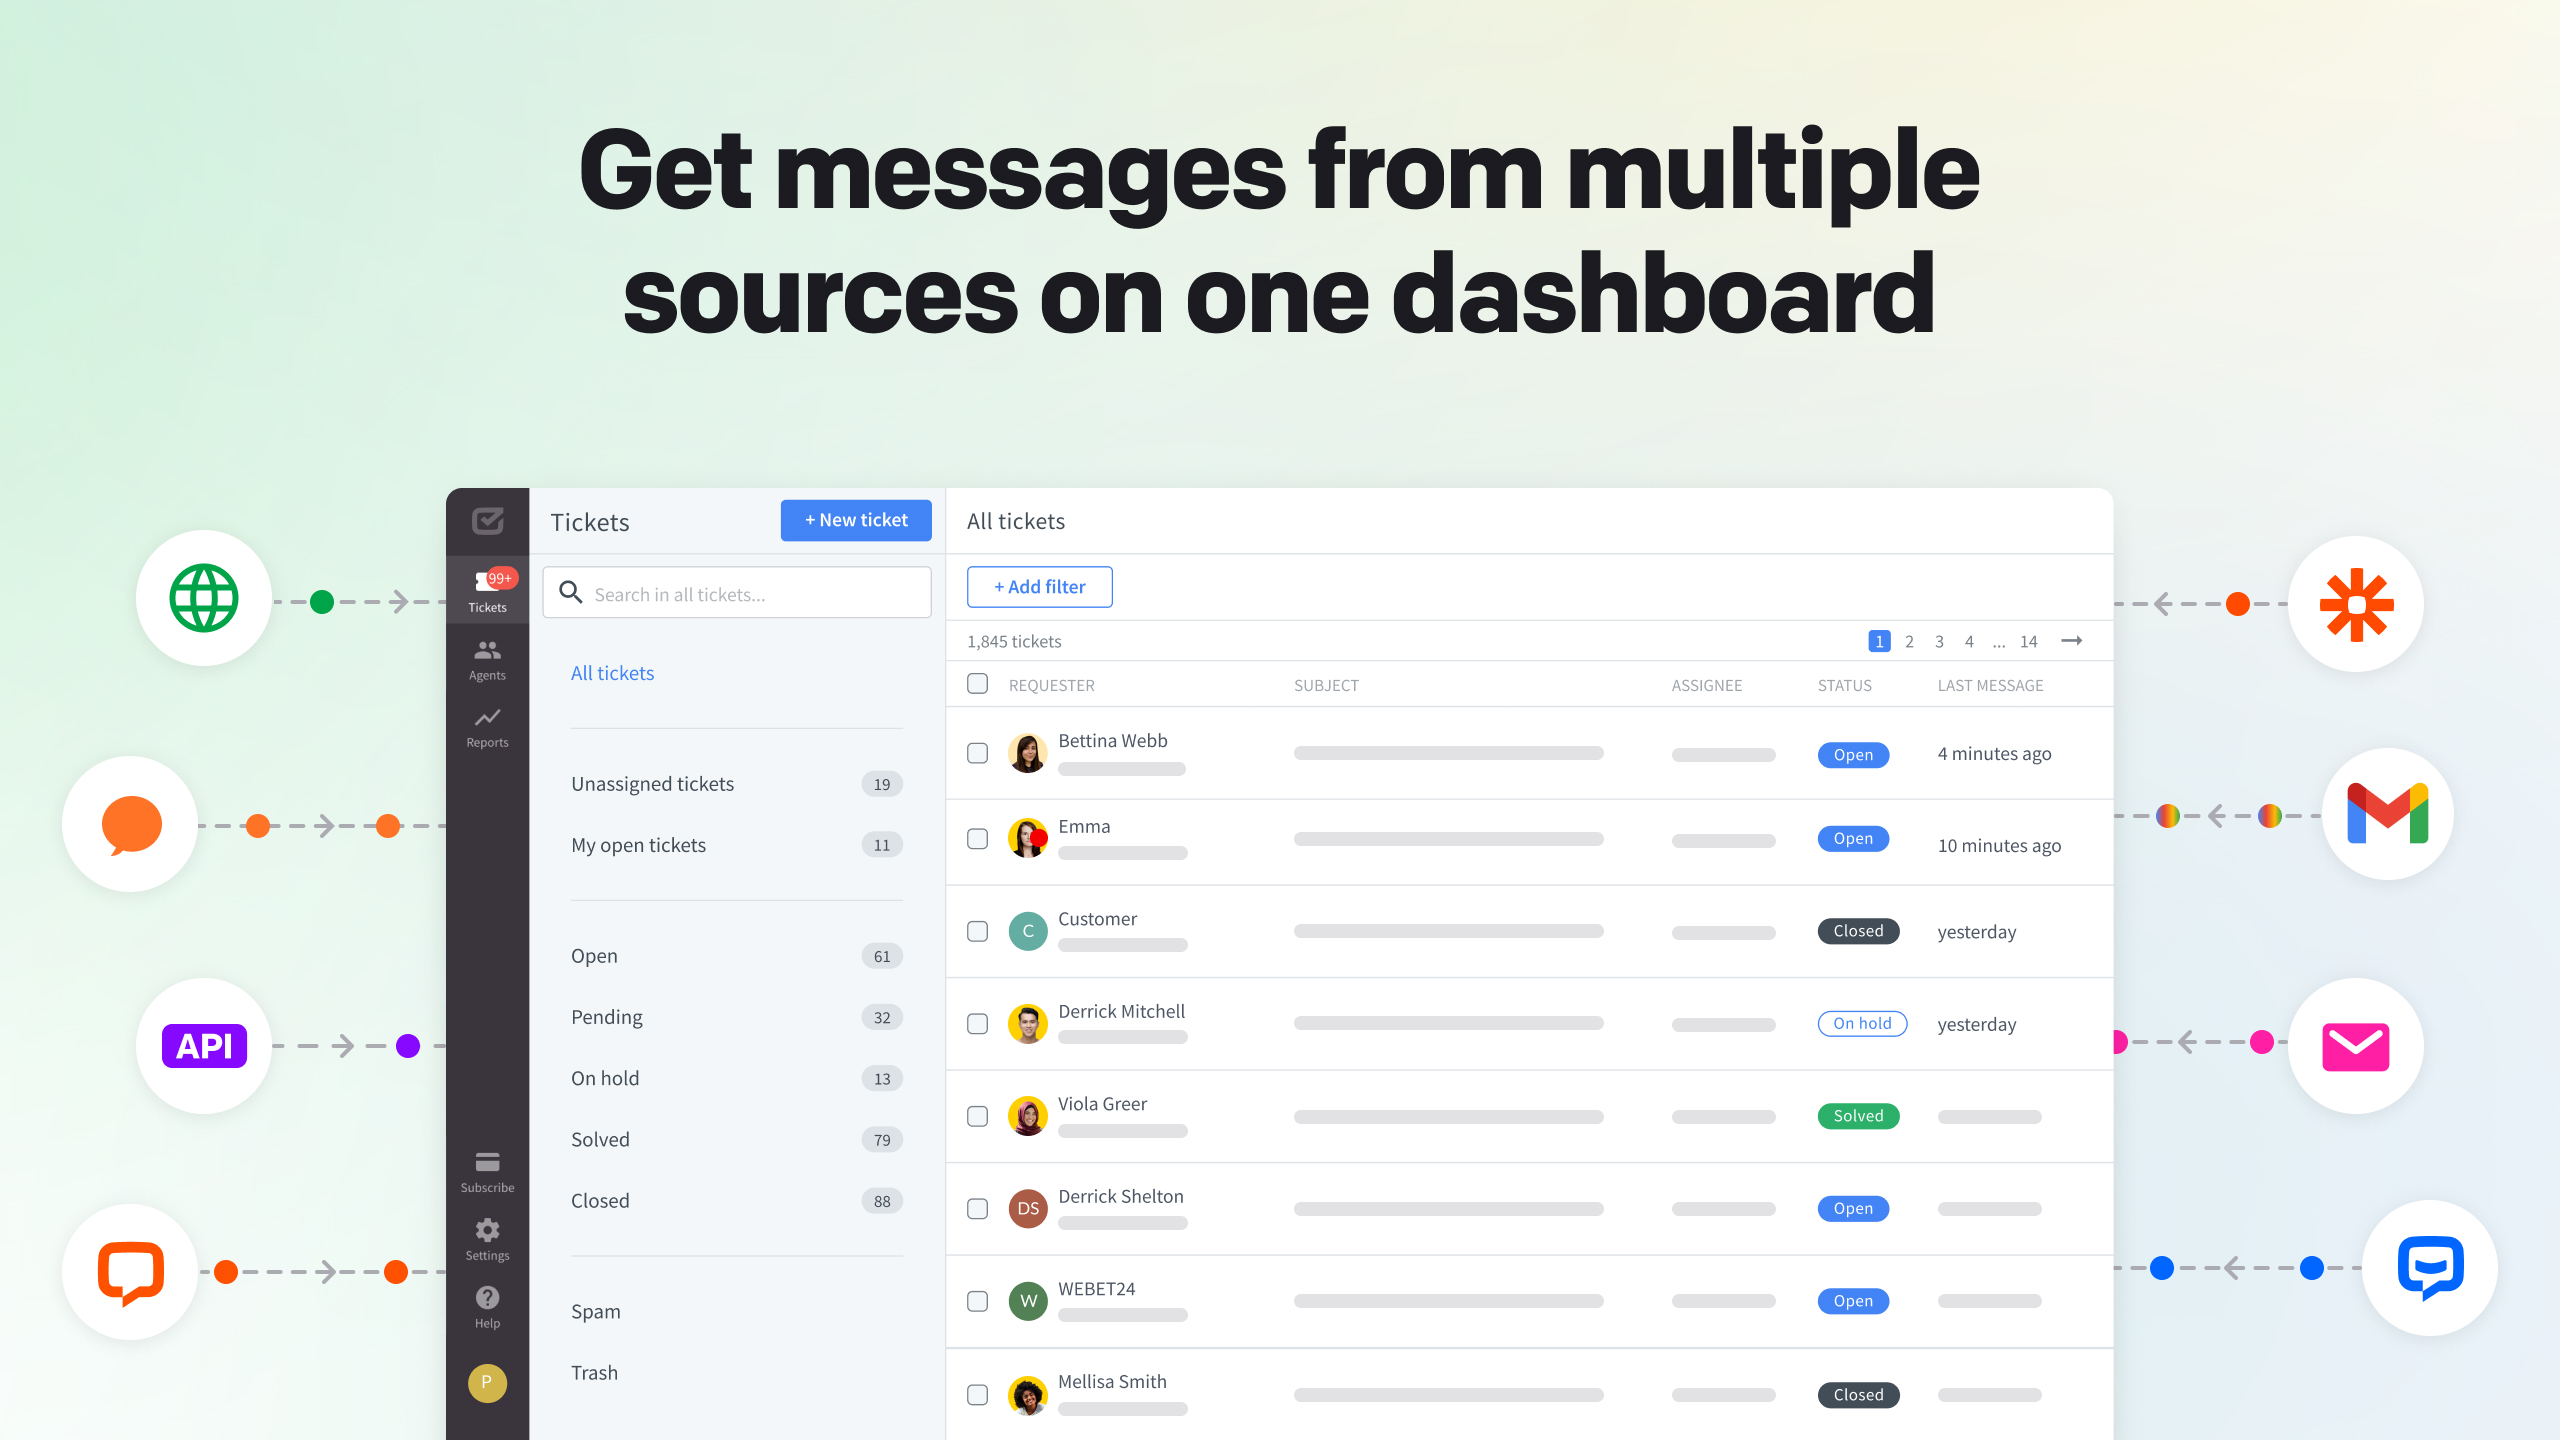 Get messages from multiple sources on one dashboard